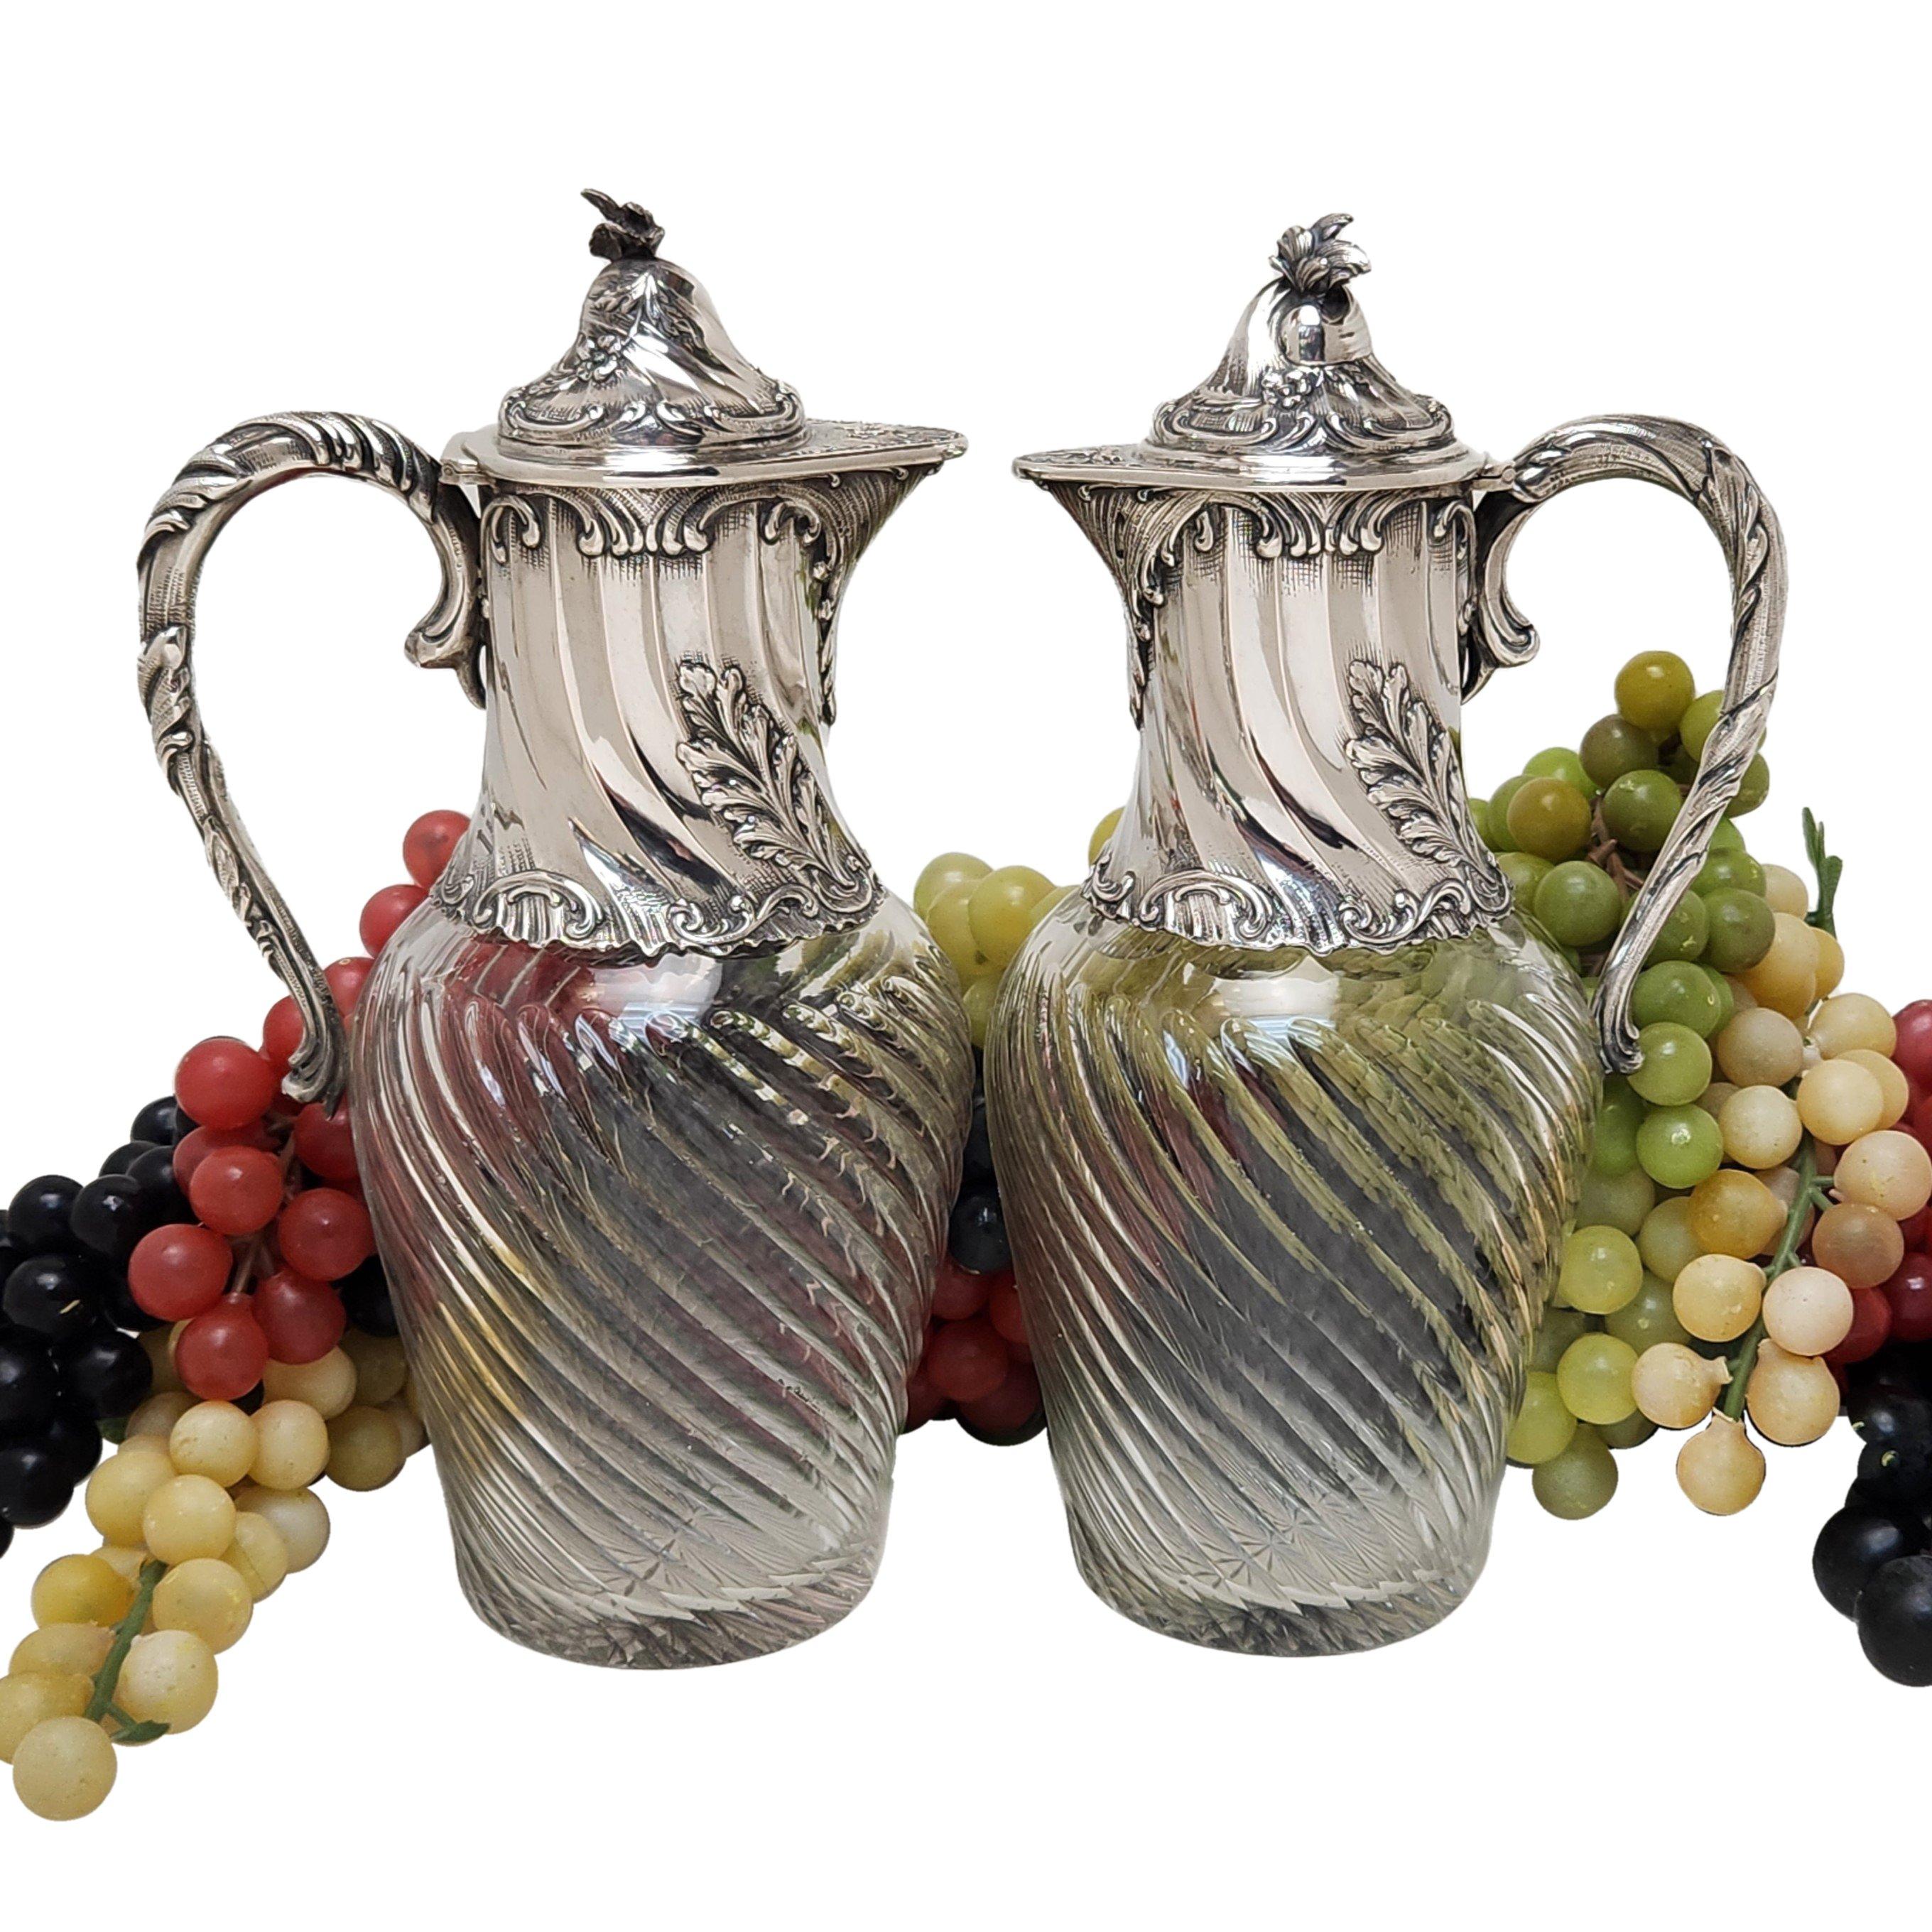 A pair of elegant solid Silver & Glass Claret Jugs. Both the Glass Bodies and Silver Necks of the Jugs are embellished with a writhen fluted pattern. The neck, hinged lid and scroll handle of each jug feature lovely chased and engraved scroll and